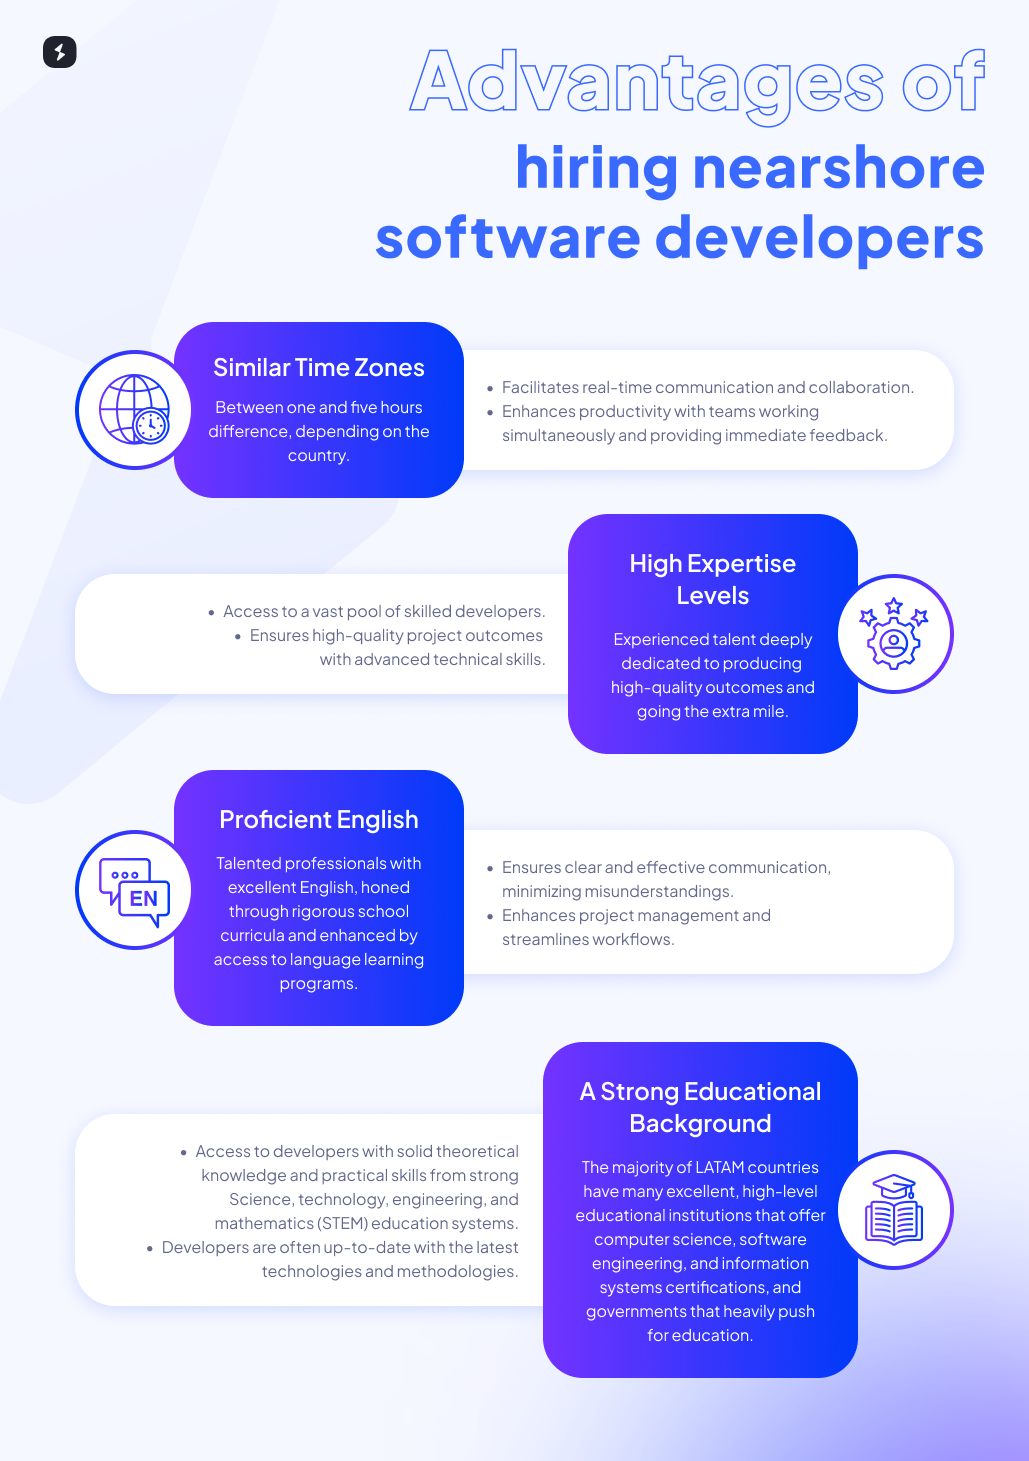 An infographic about the advantages of hiring nearshore software developers